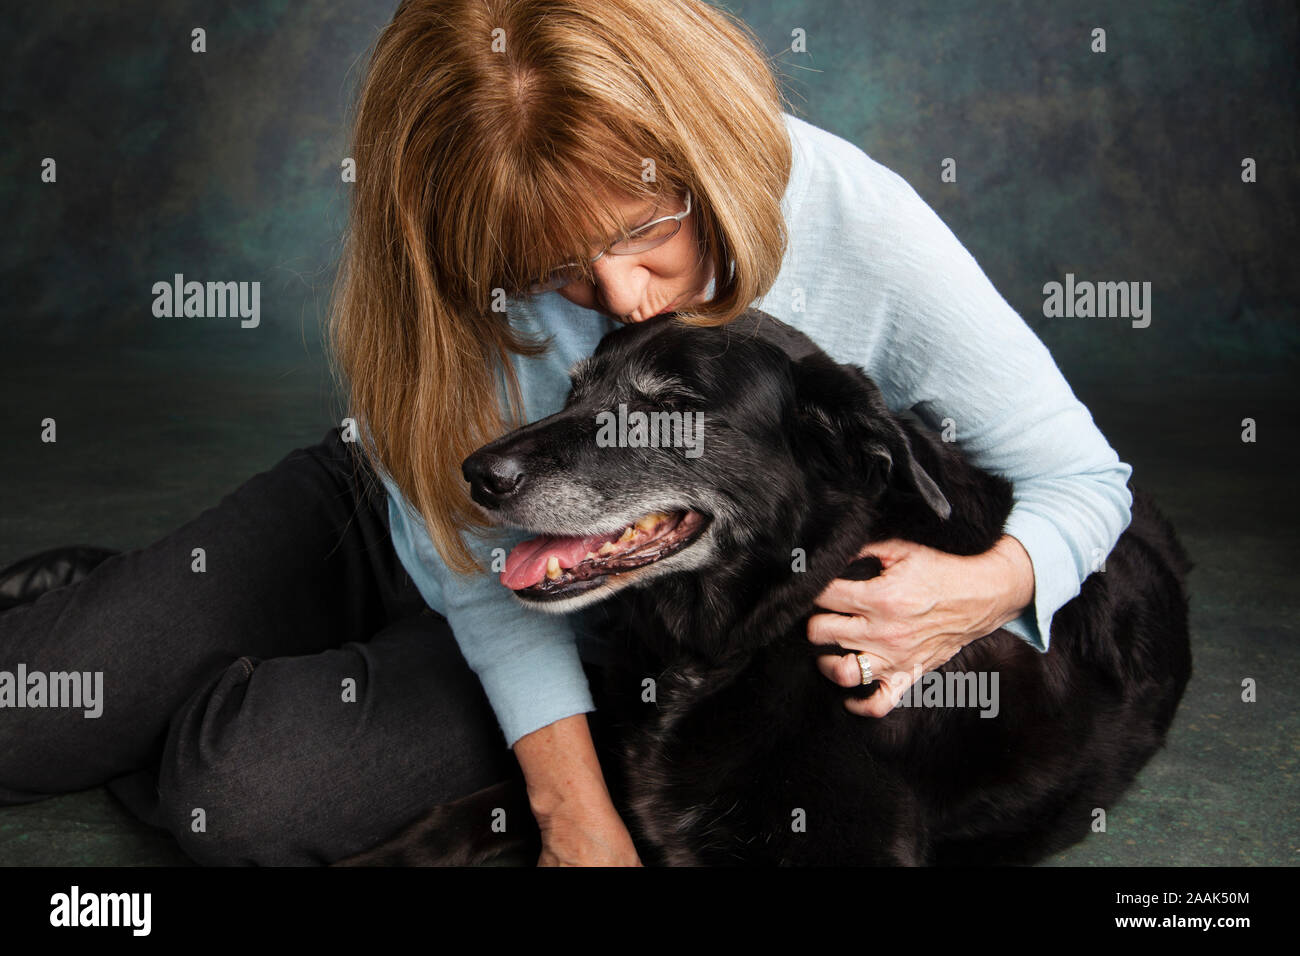 Portrait of woman with dog Stock Photo